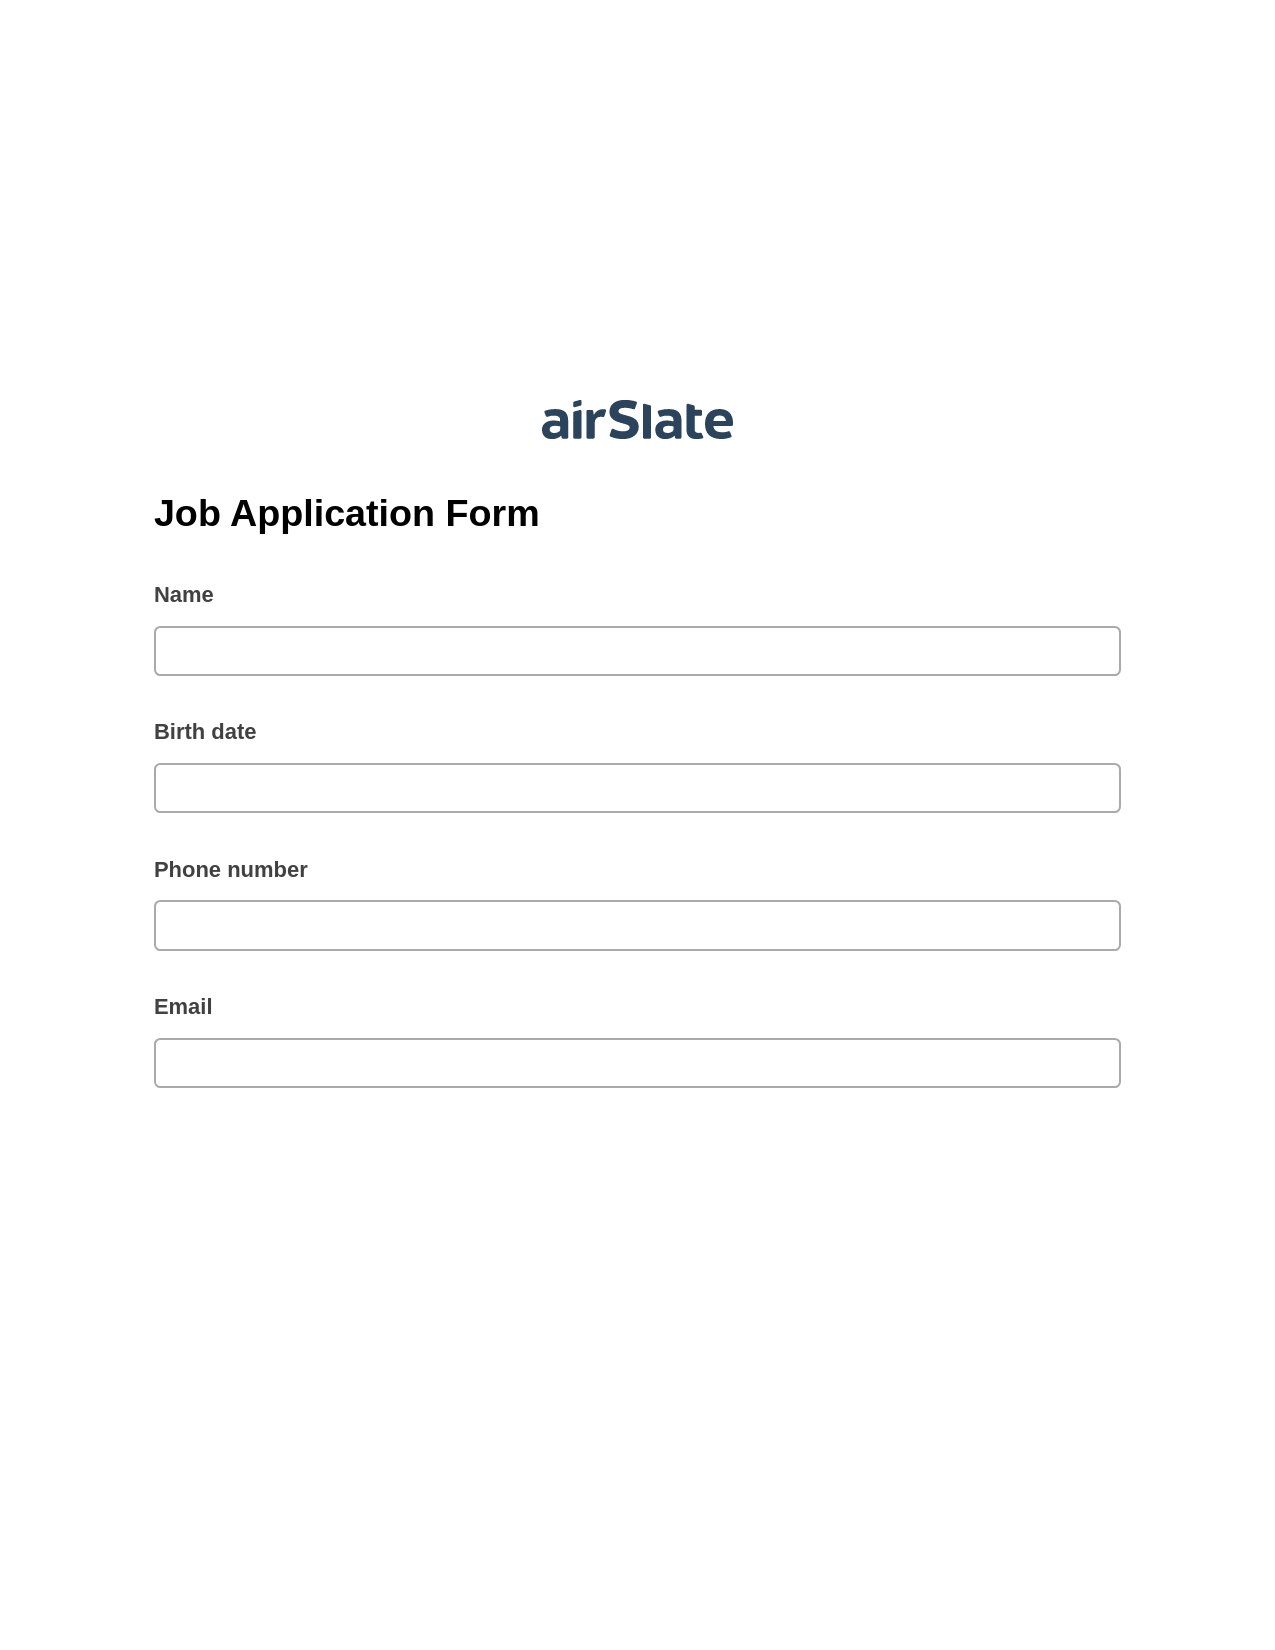 Job Application Form Pre-fill from Excel Spreadsheet Bot, Email Notification Bot, Export to Formstack Documents Bot